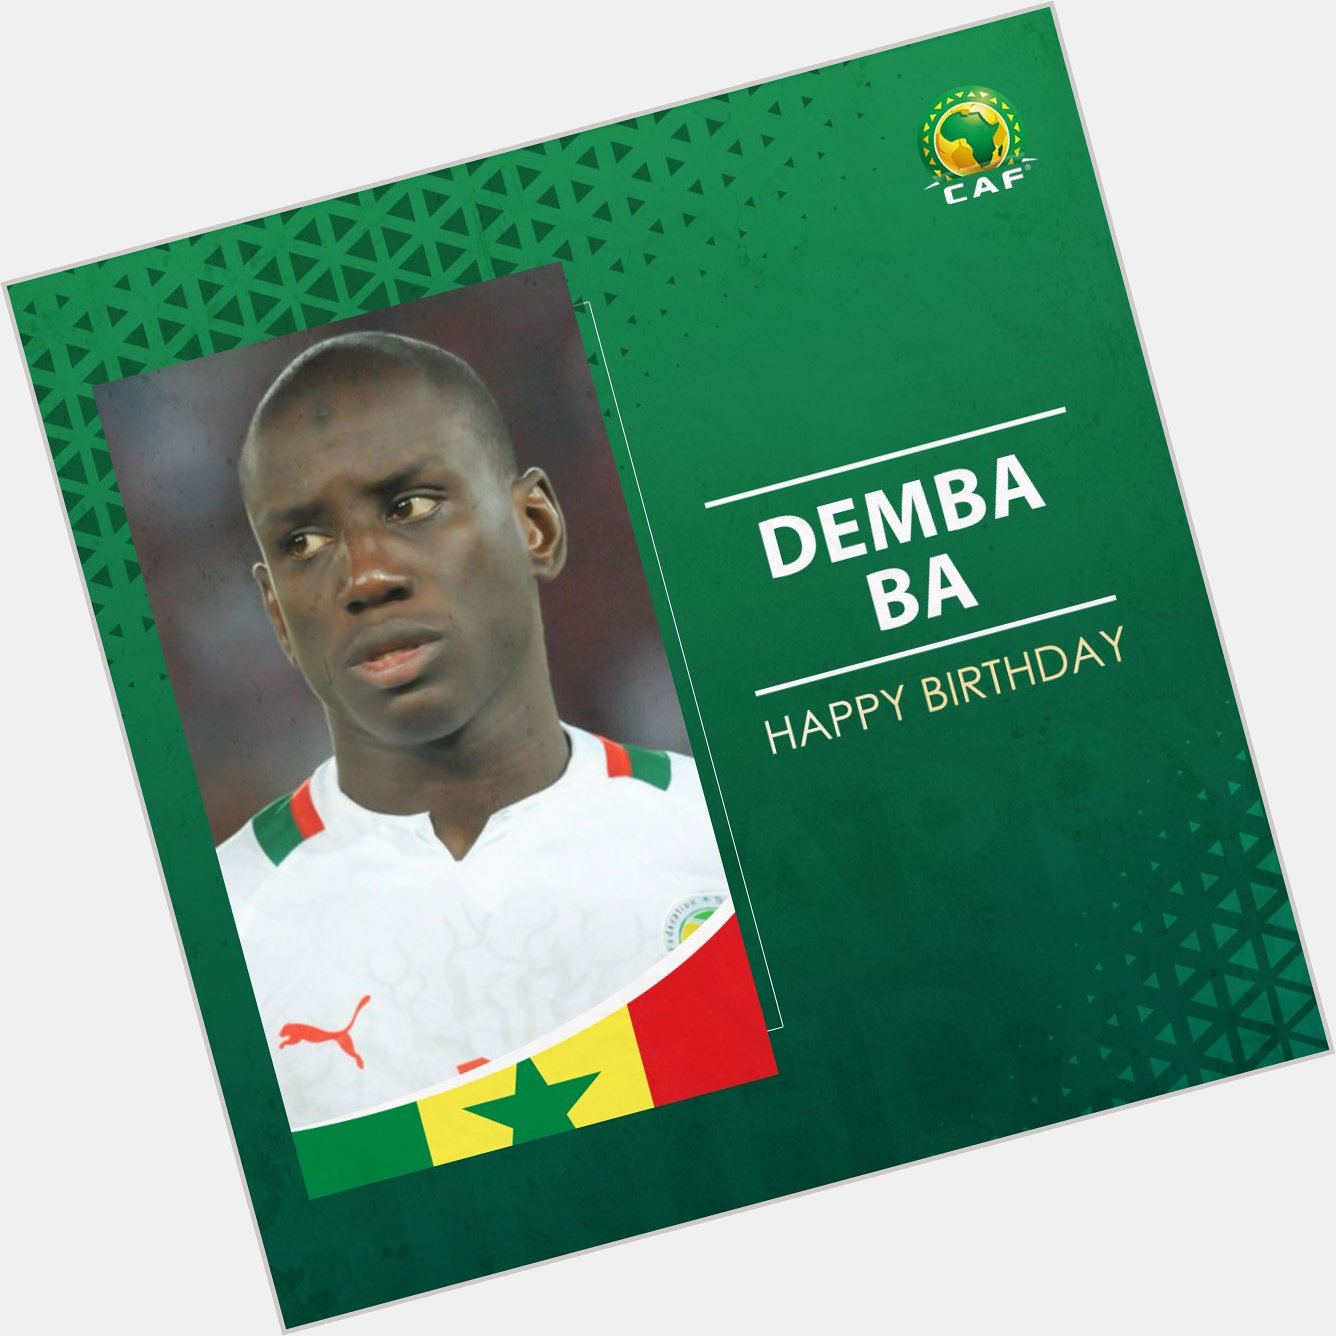   Happy birthday to Senegal\s Demba Ba who turns 35 today Enjoy your day! 